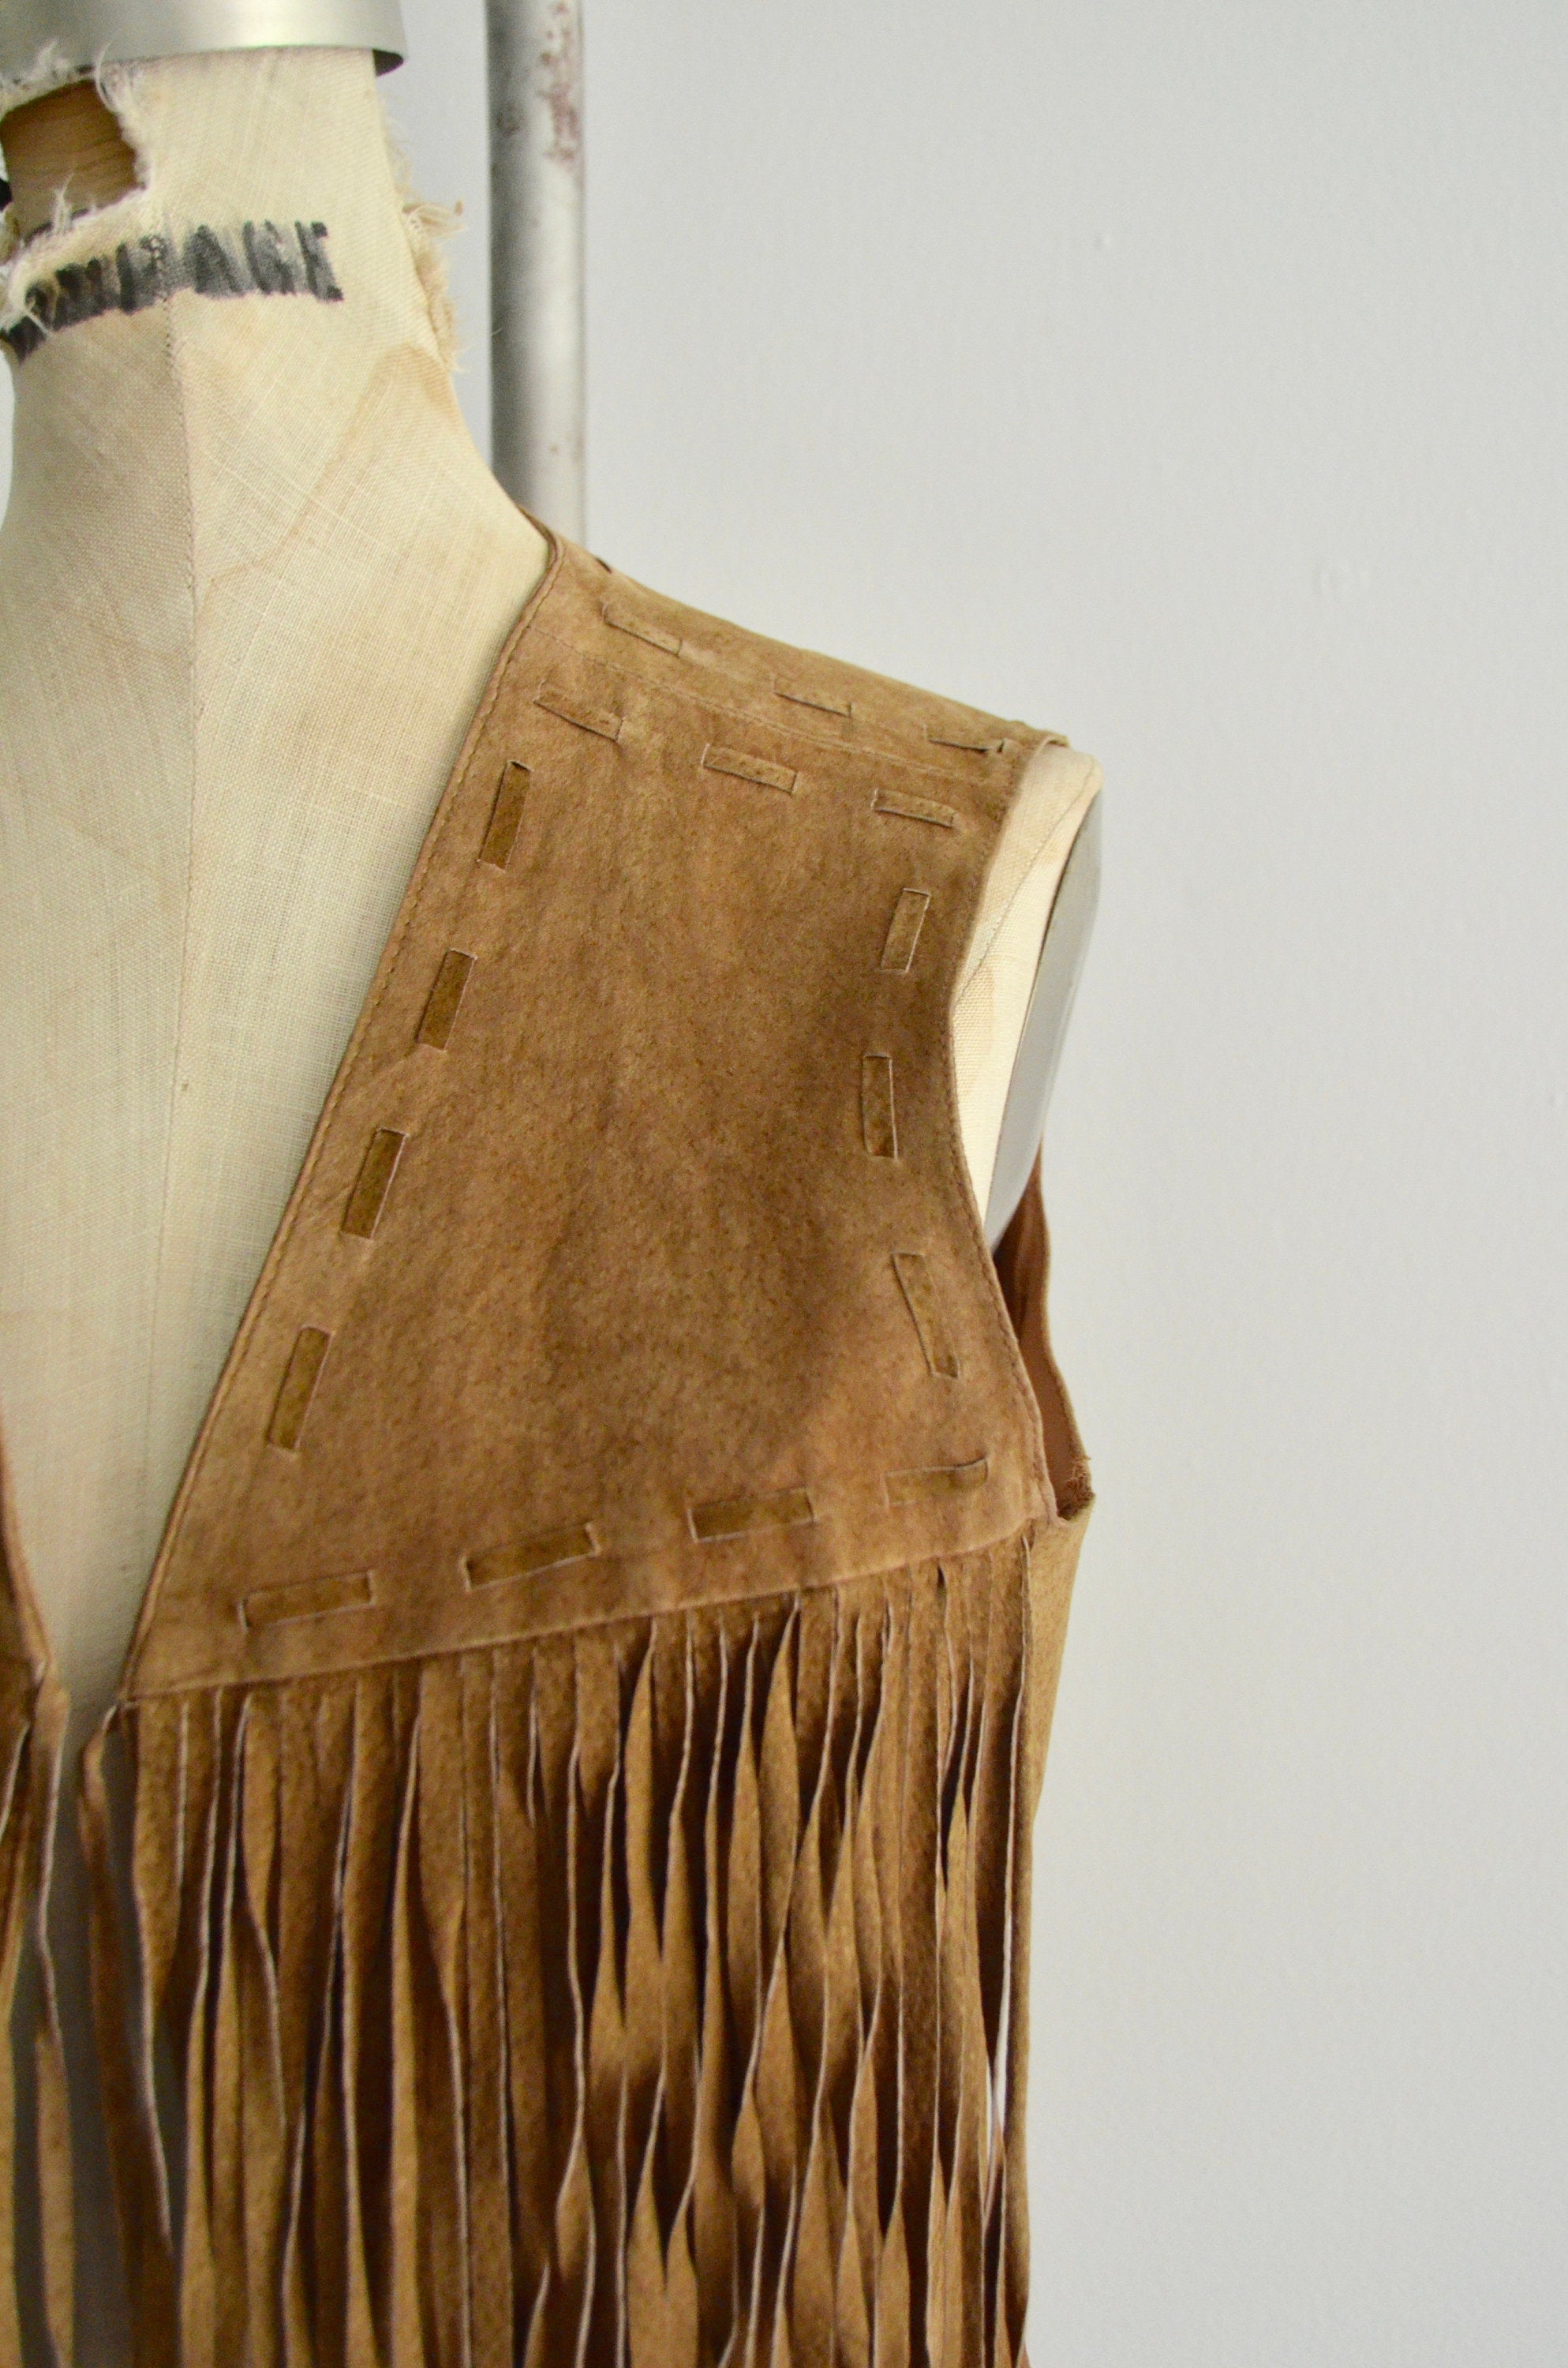 1970S Western Bohemian Toffee Color Leather Fringe Vest Suede Boho Chic Extra Long